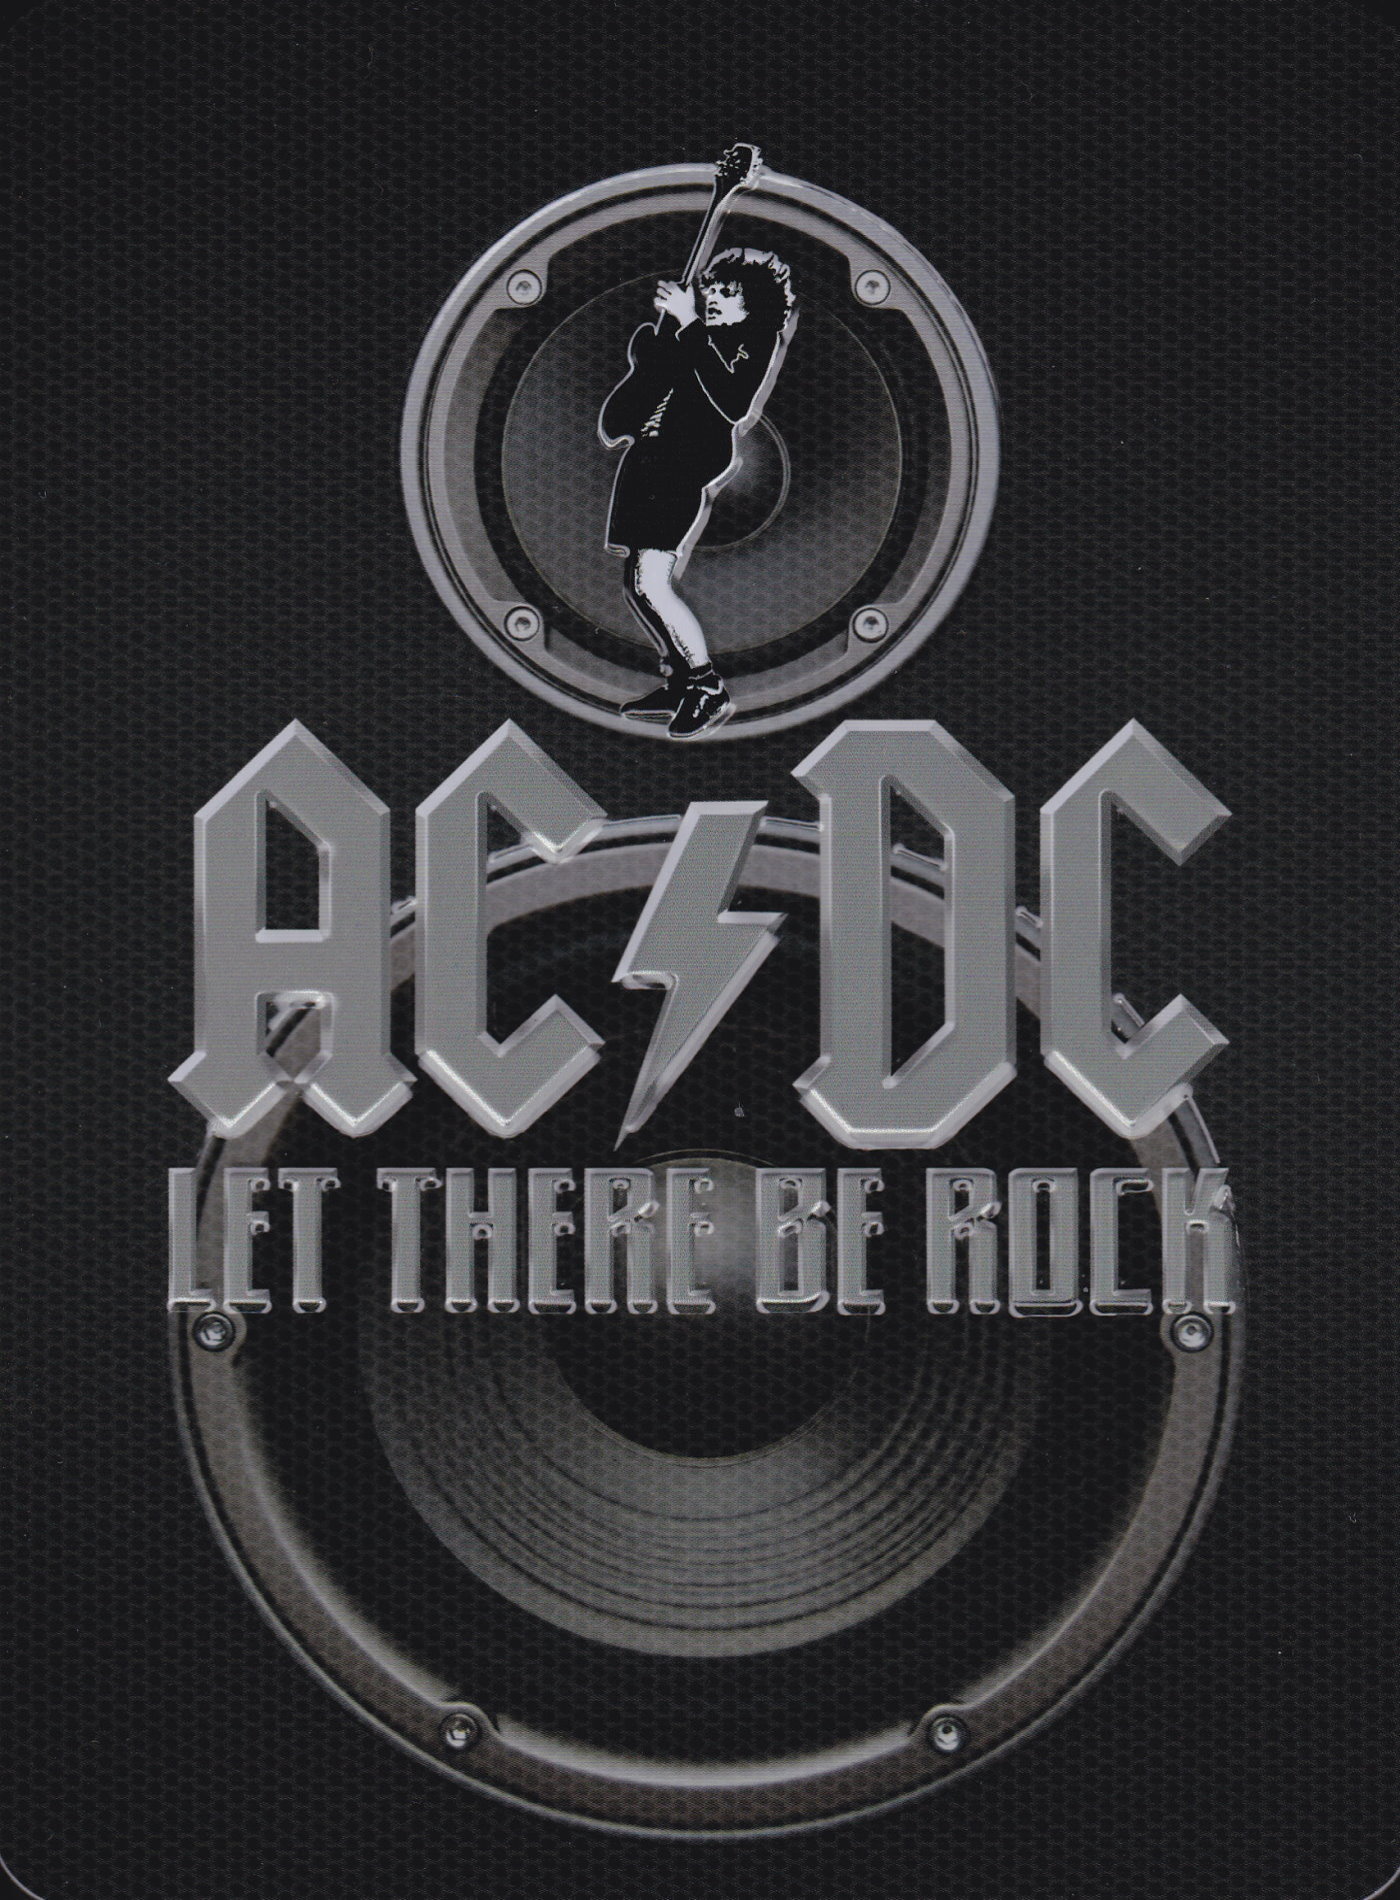 Cover - AC/DC - Let There Be Rock.jpg